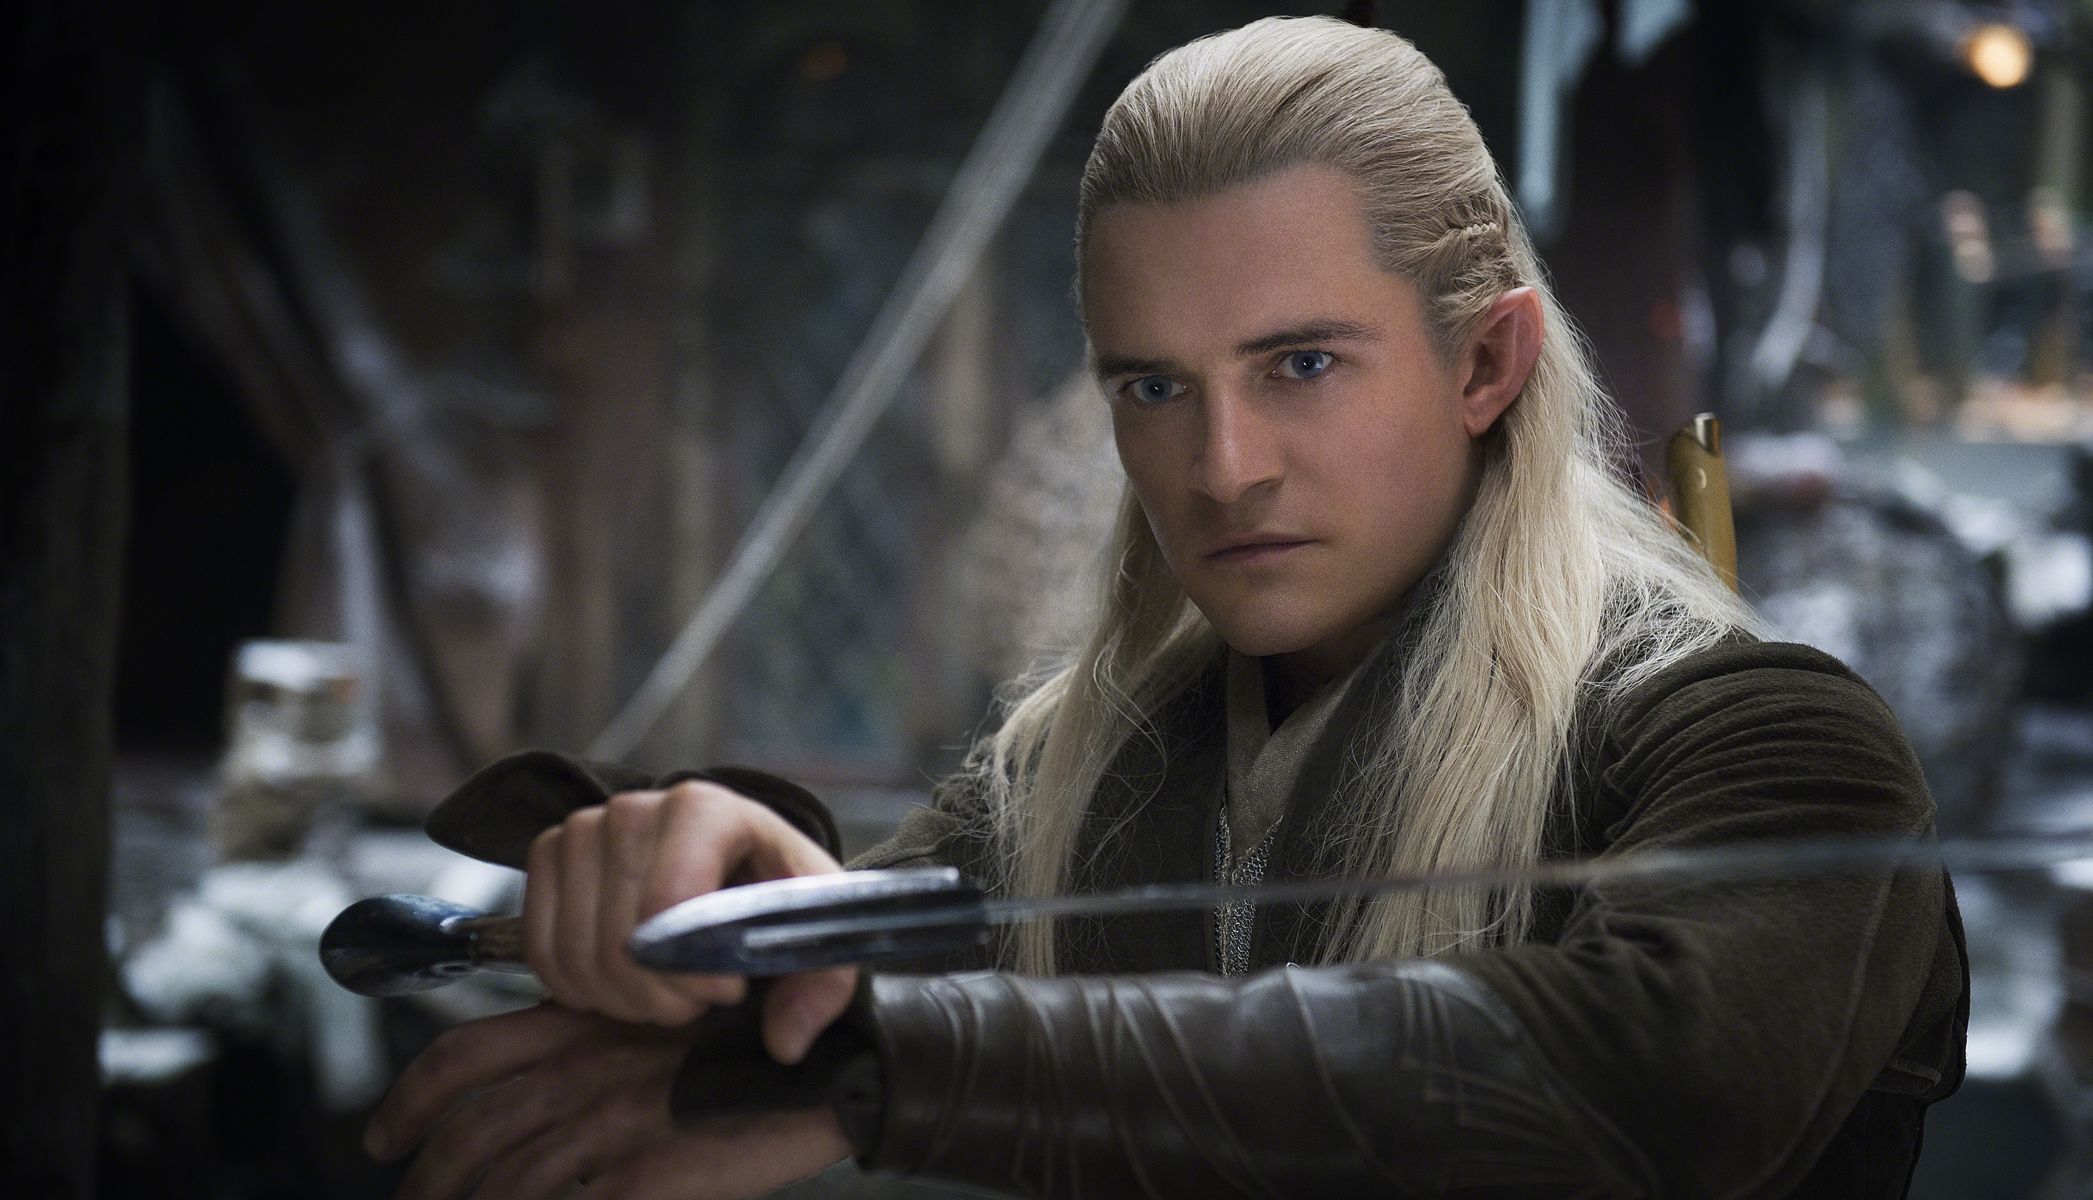 movie, the hobbit: the desolation of smaug, orlando bloom, the lord of the rings